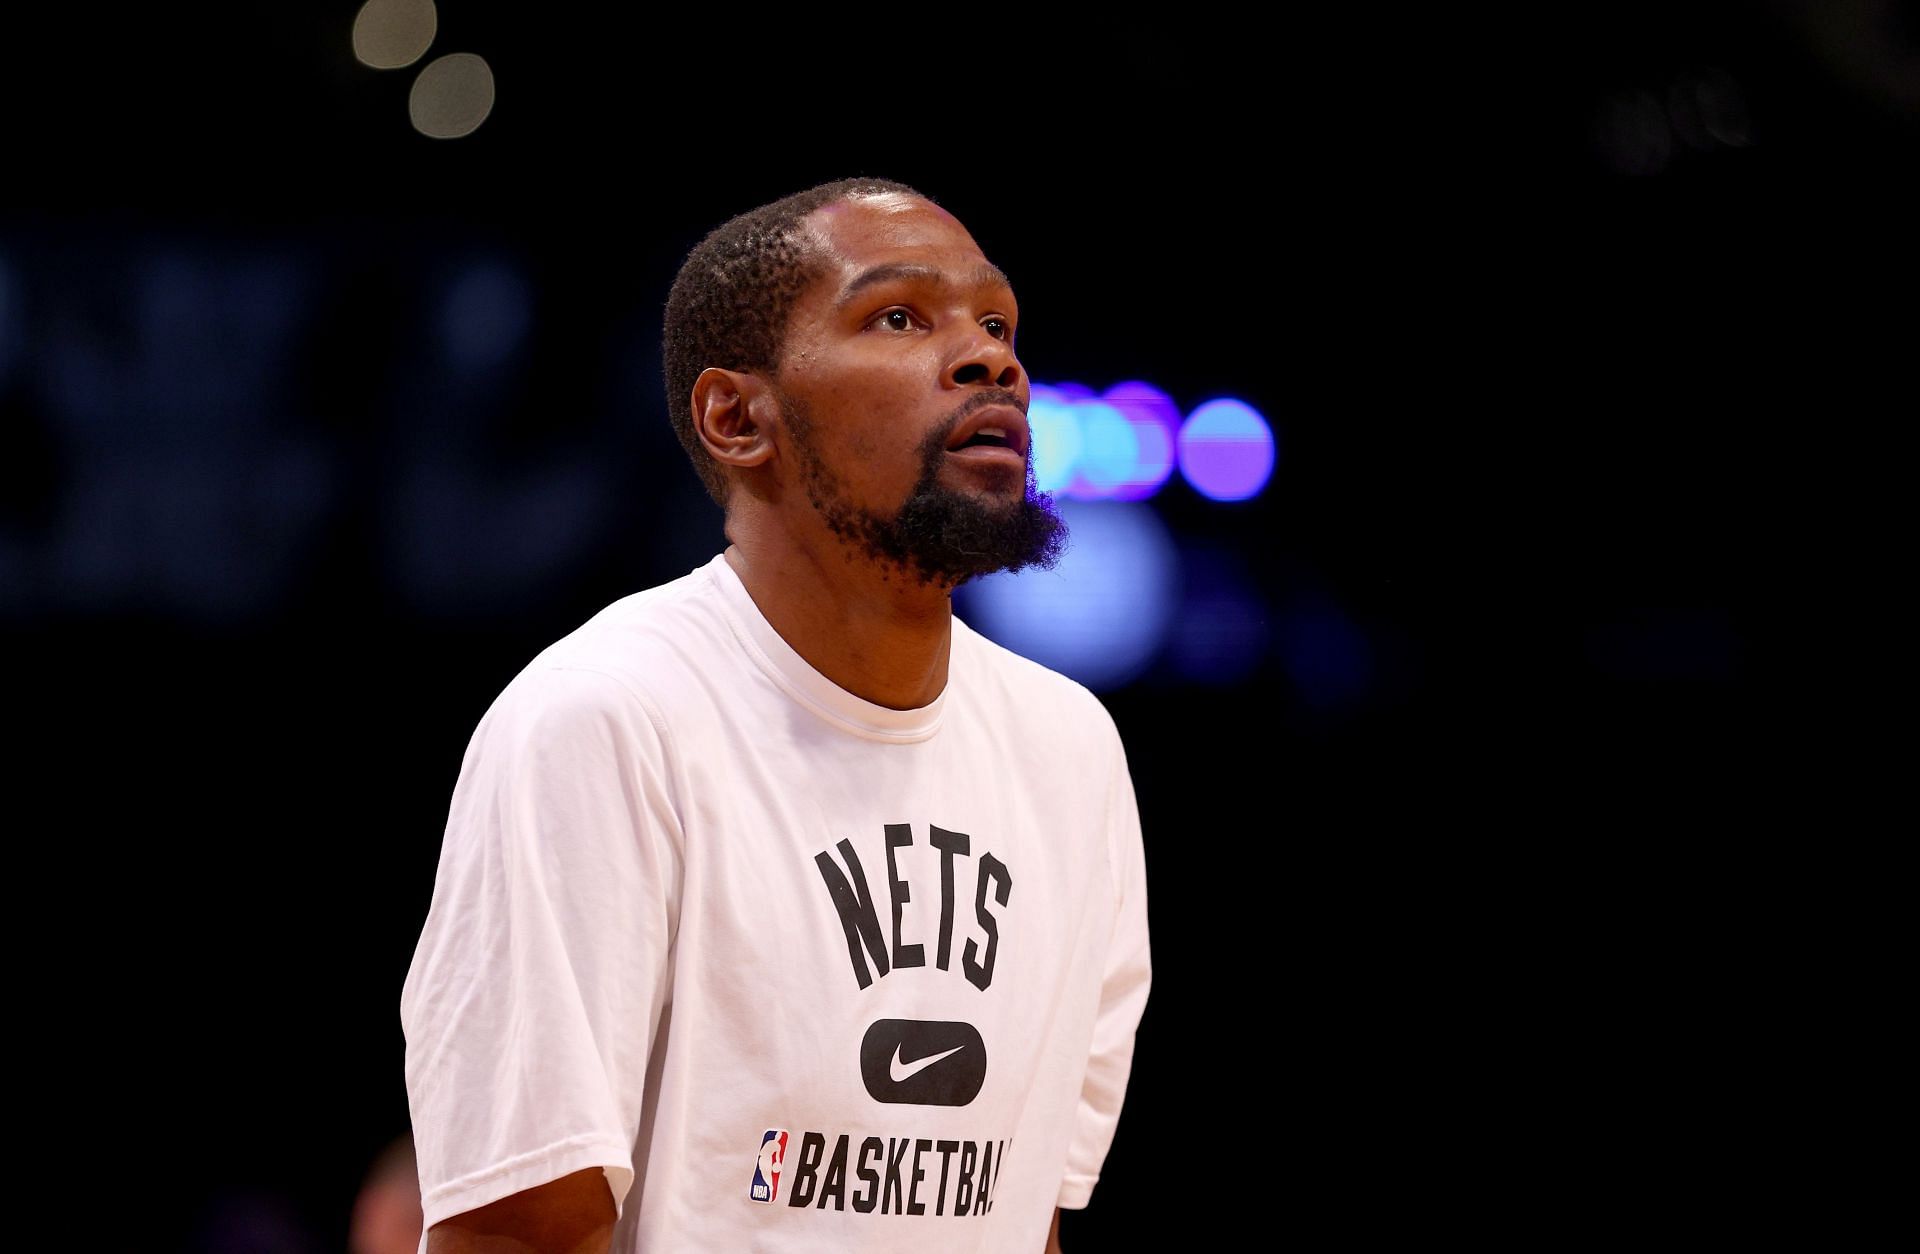 Michael Che believes that KD made a mistake joining the Brooklyn Nets.